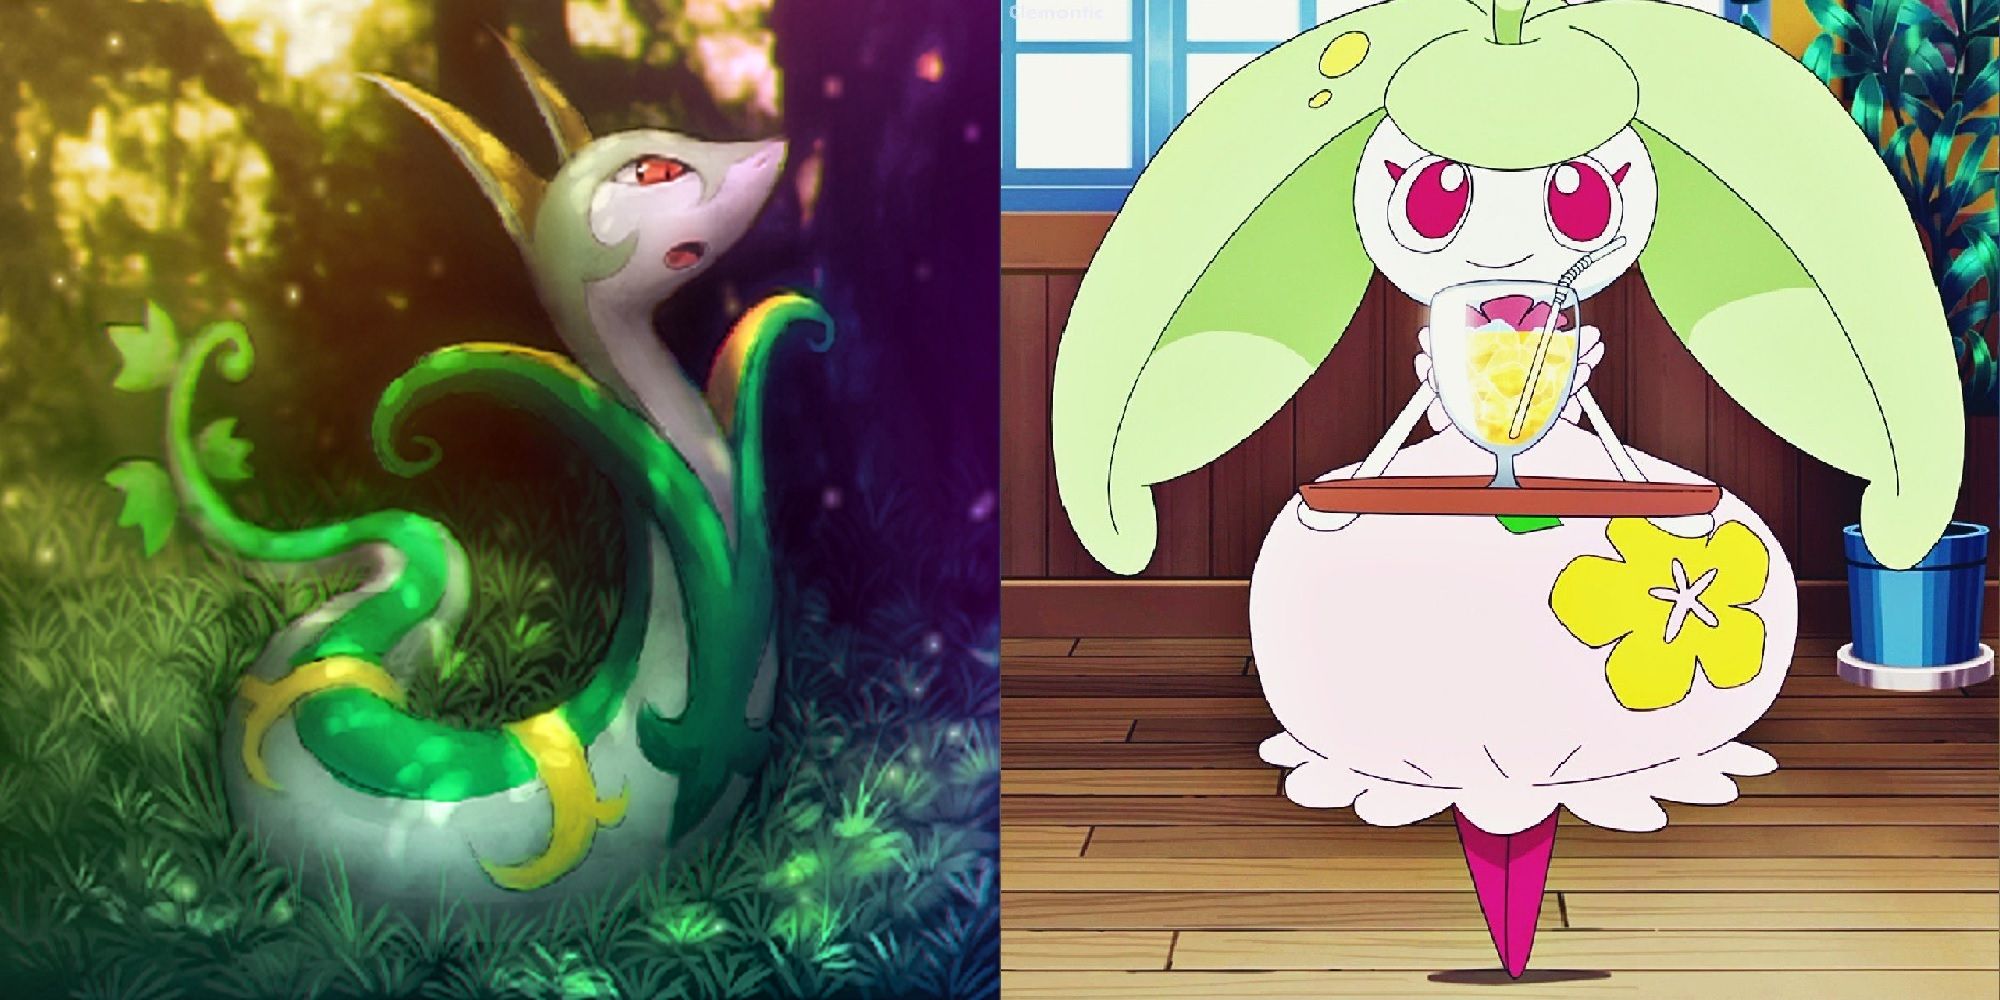 Split image of Serperior artwork and Steenee as it appears in the Pokemon Sun and Moon anime